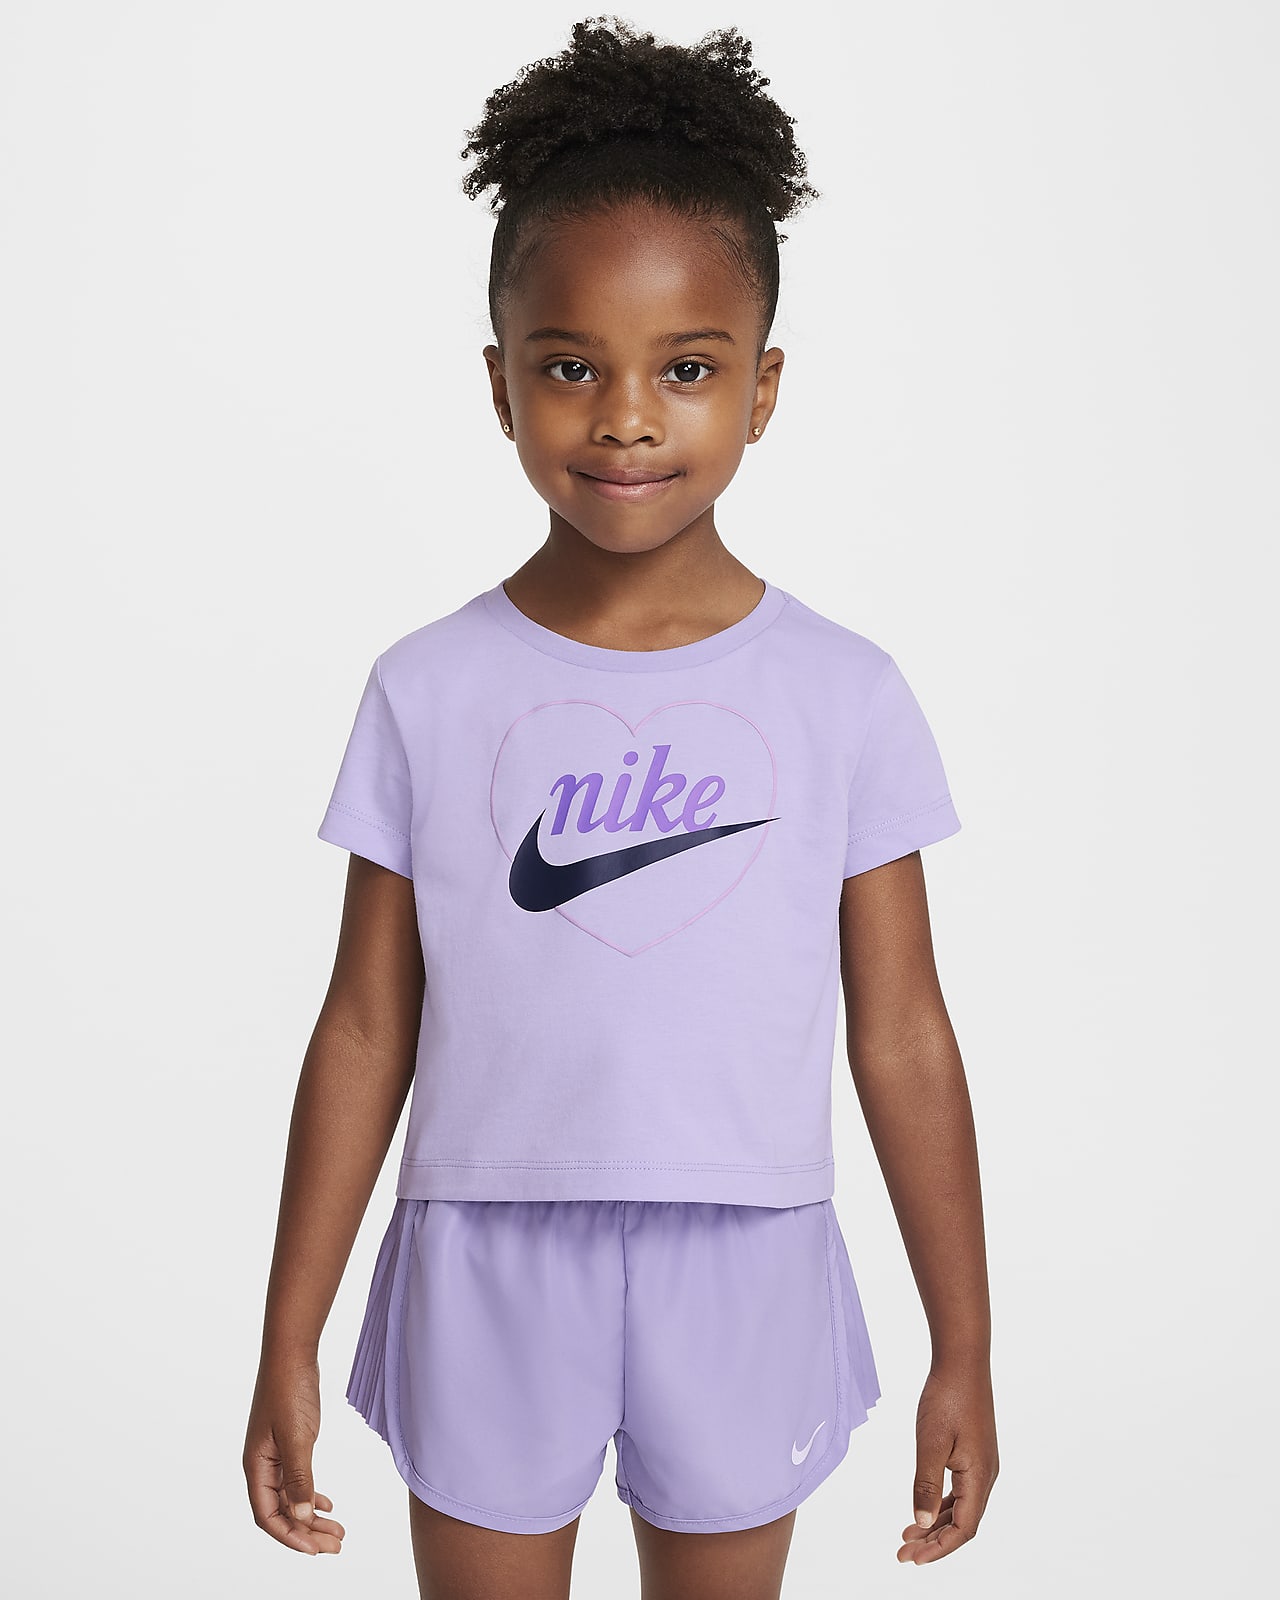 Nike New Impressions Toddler Heart Graphic T-Shirt